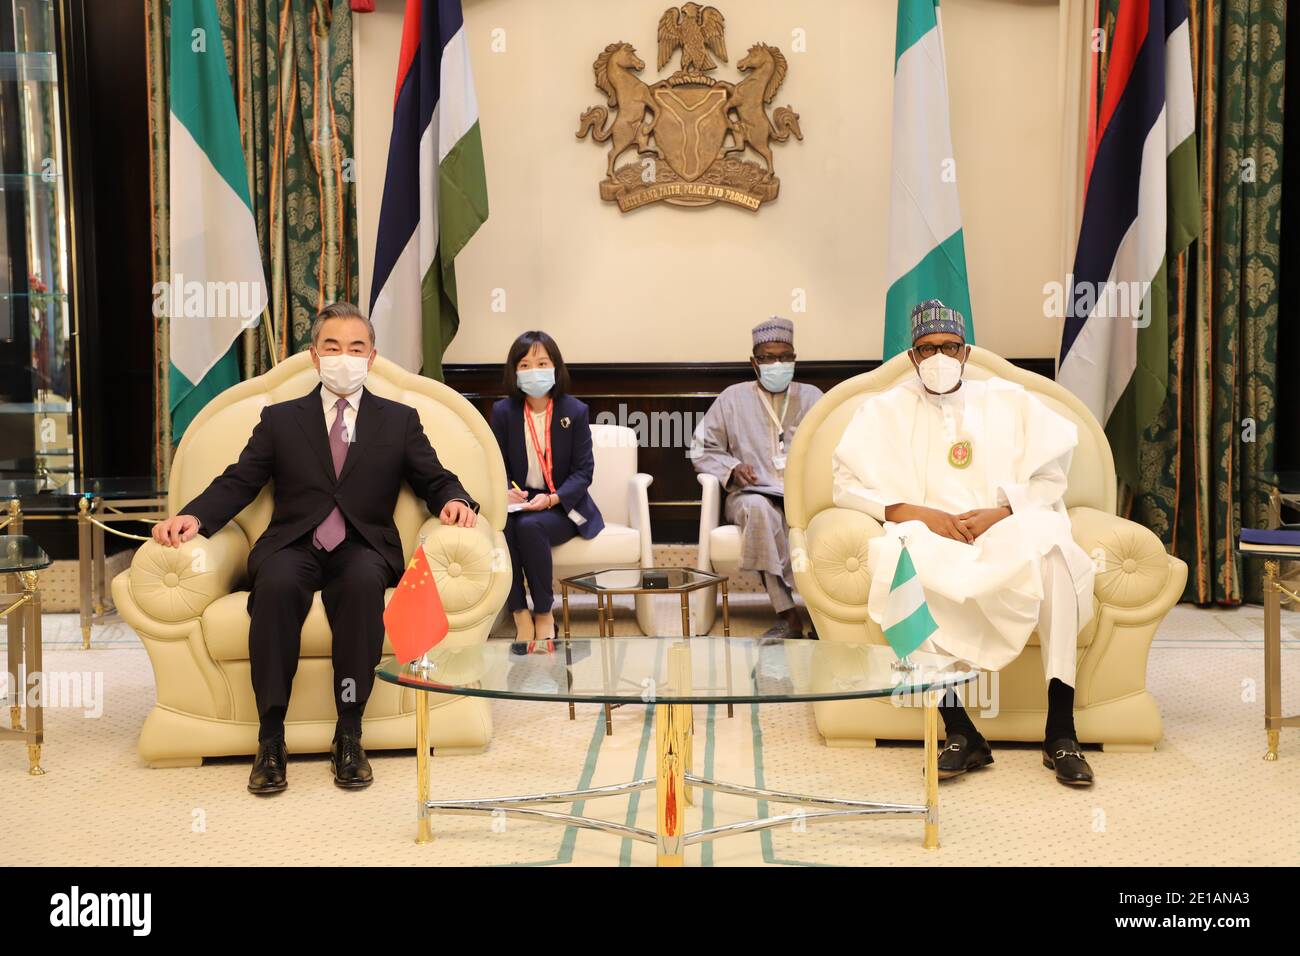 Abuja, Nigeria. 5th Jan, 2021. Nigerian President Muhammadu Buhari (1st R) meets with visiting Chinese State Councilor and Foreign Minister Wang Yi (1st L) in Abuja, Nigeria, on Jan. 5, 2021. Credit: Jiang Xuan/Xinhua/Alamy Live News Stock Photo